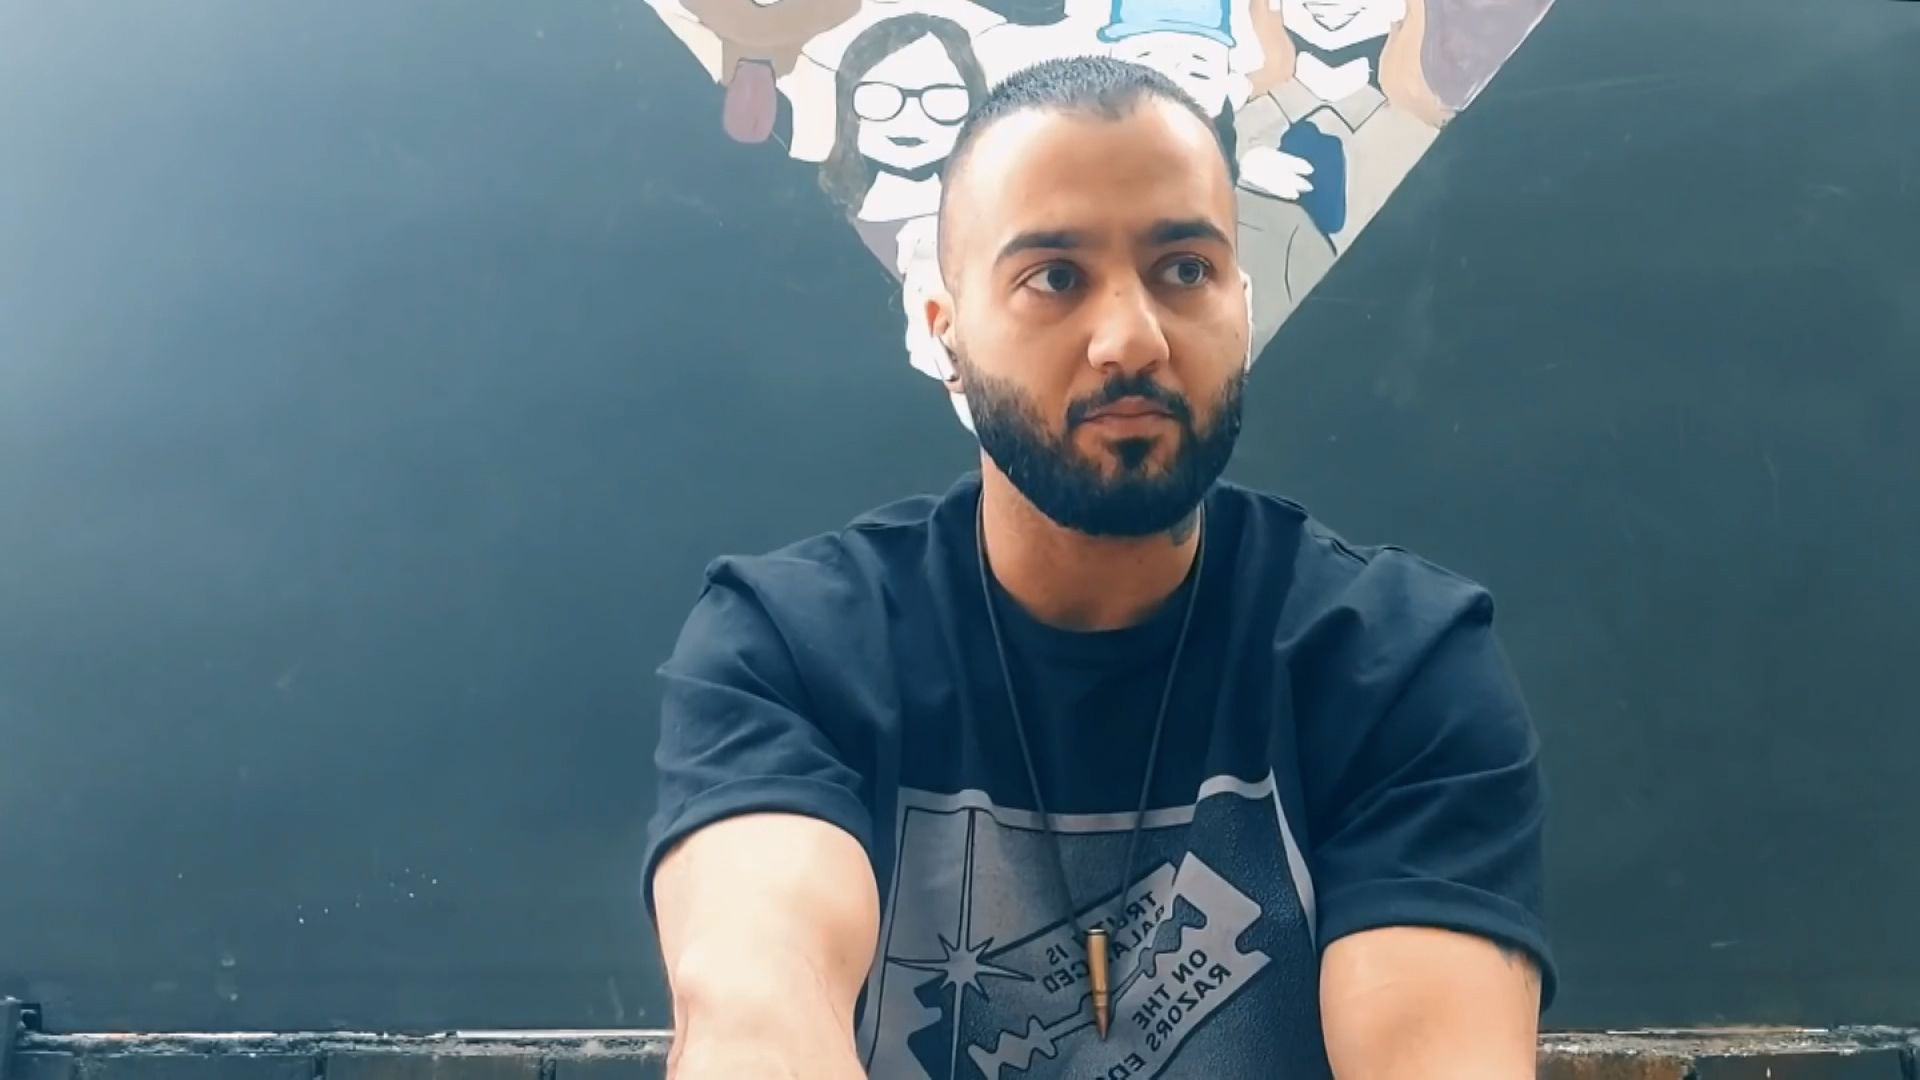 Toomaj Salehi, a prominent Iranian rapper, has been returned to prison less than two weeks after being released on bail.